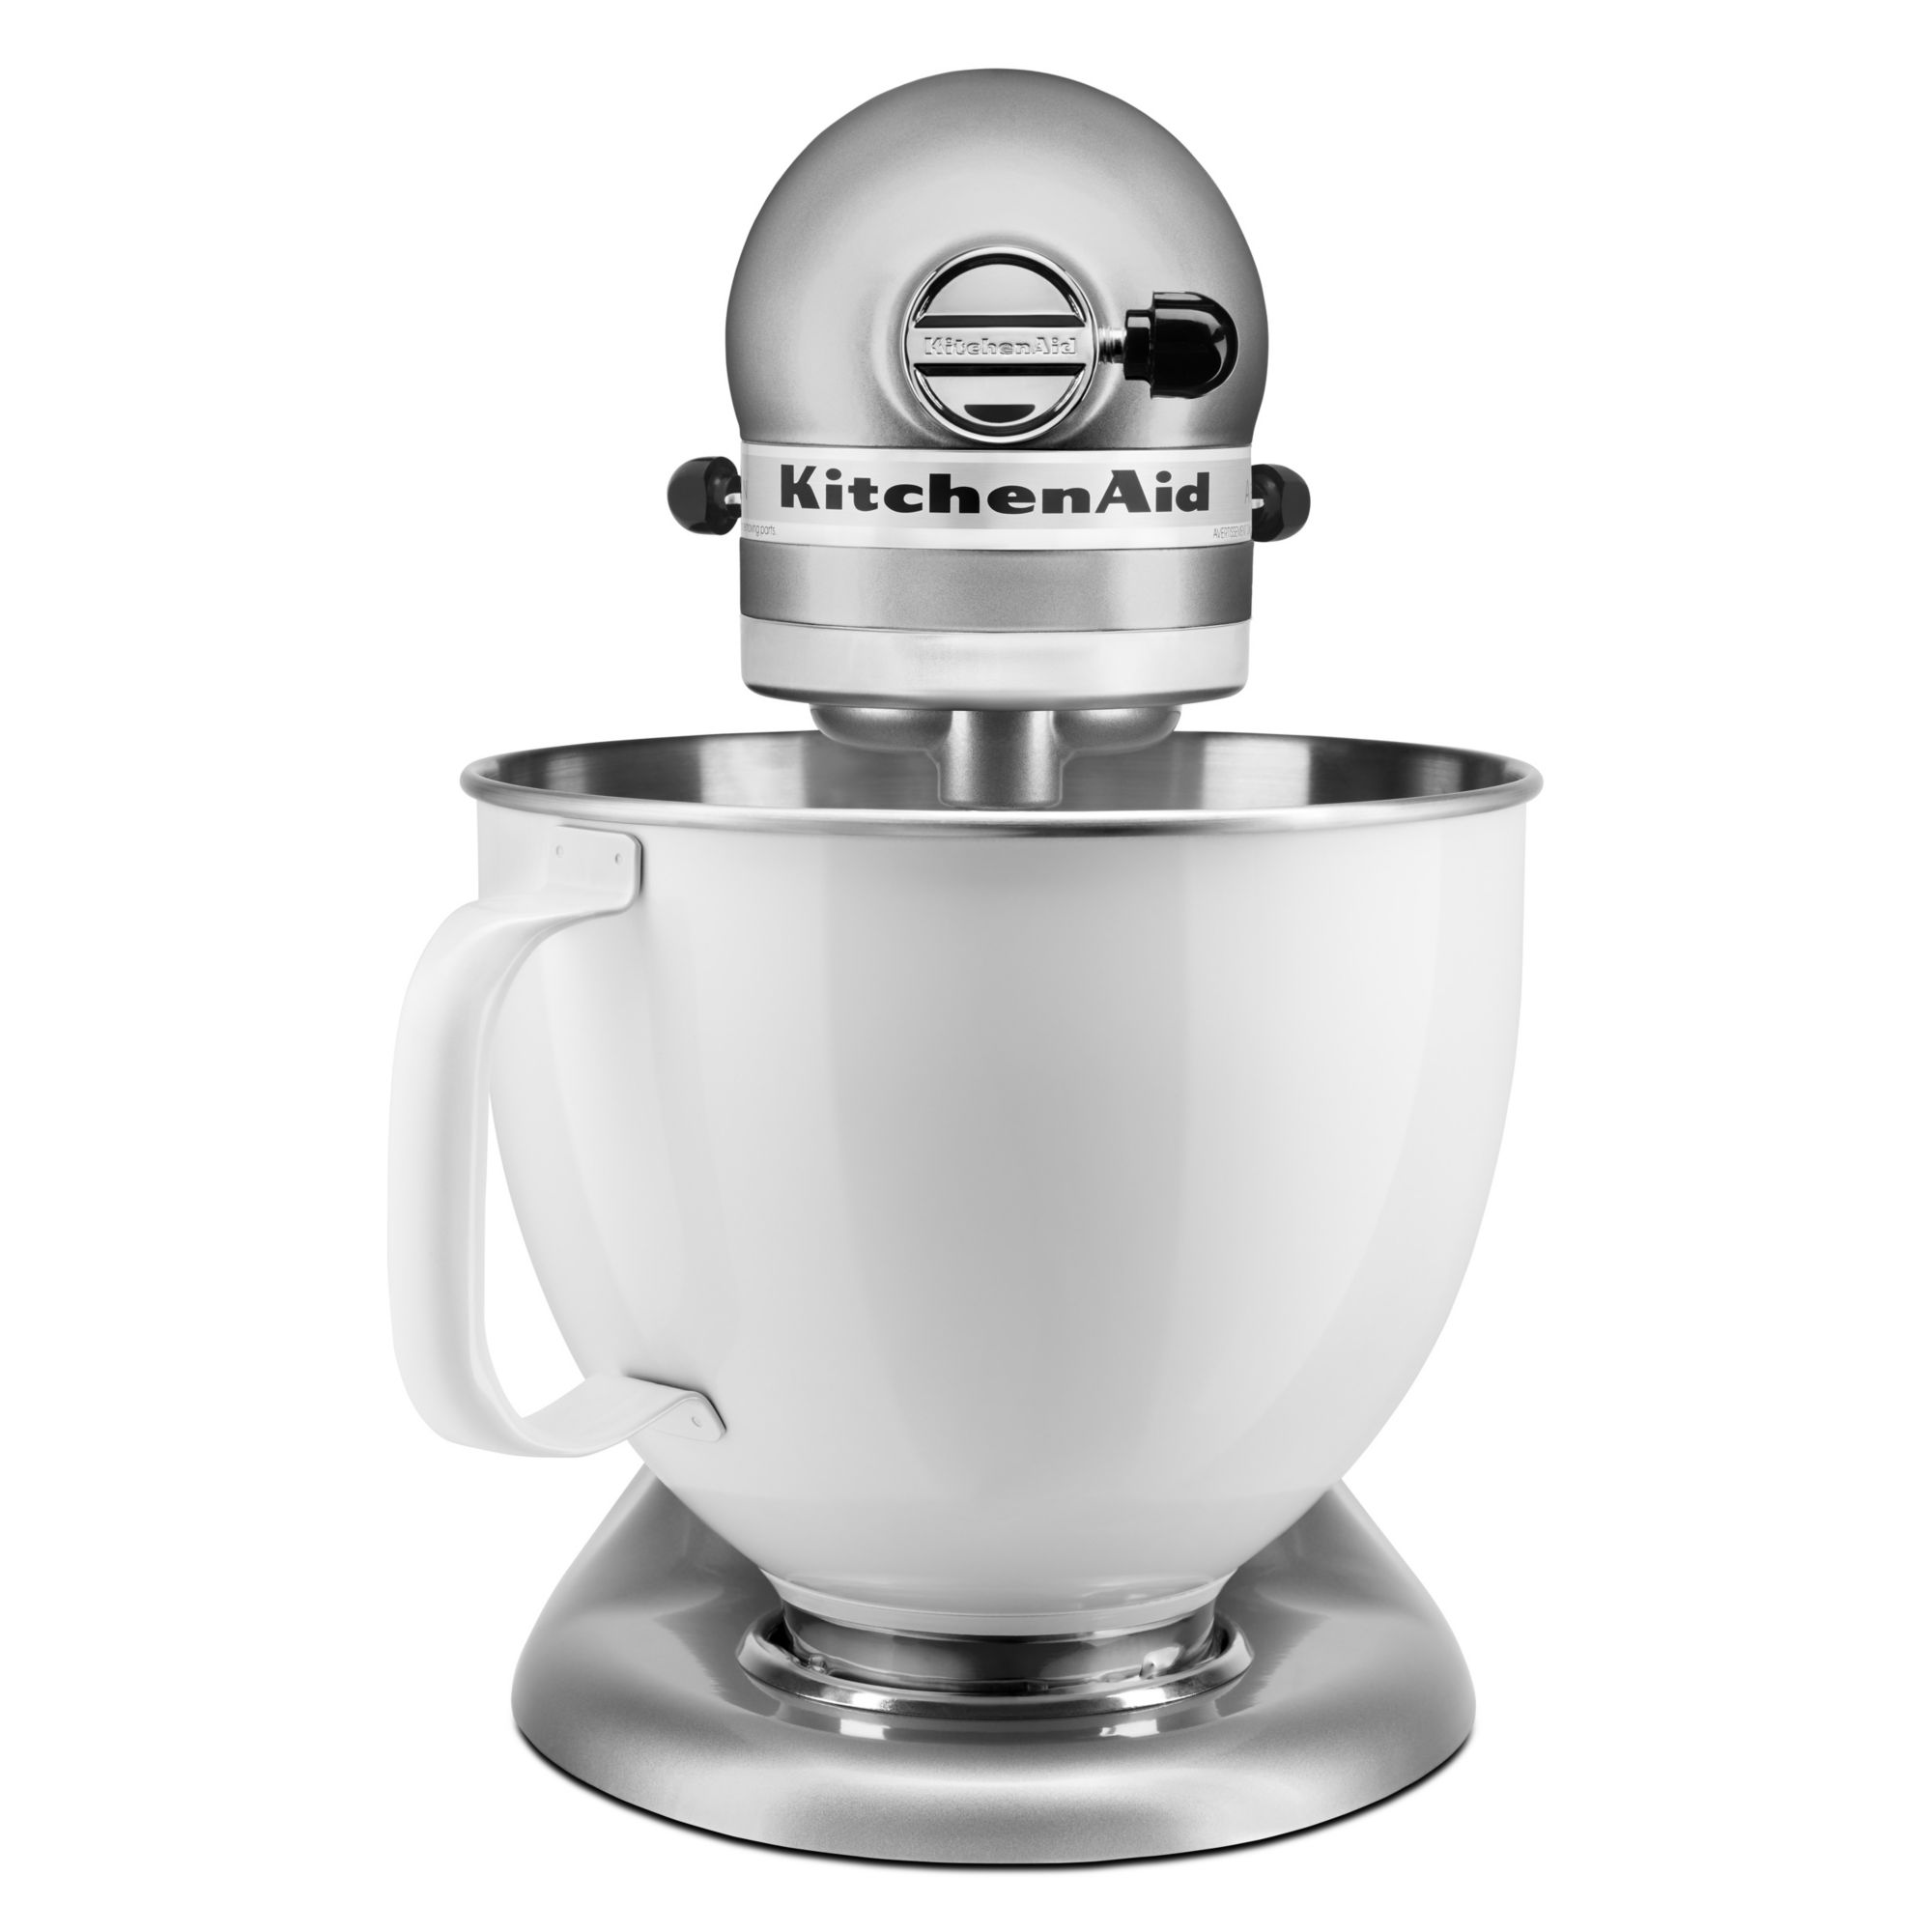 Explore Our Exciting Line of Kitchenaid 7 Quart Bowl-Lift Stand Mixer With Redesigned  Premium Touchpoints Pistachio KitchenAid . Unique Designs You Can't Find  Anywhere Else